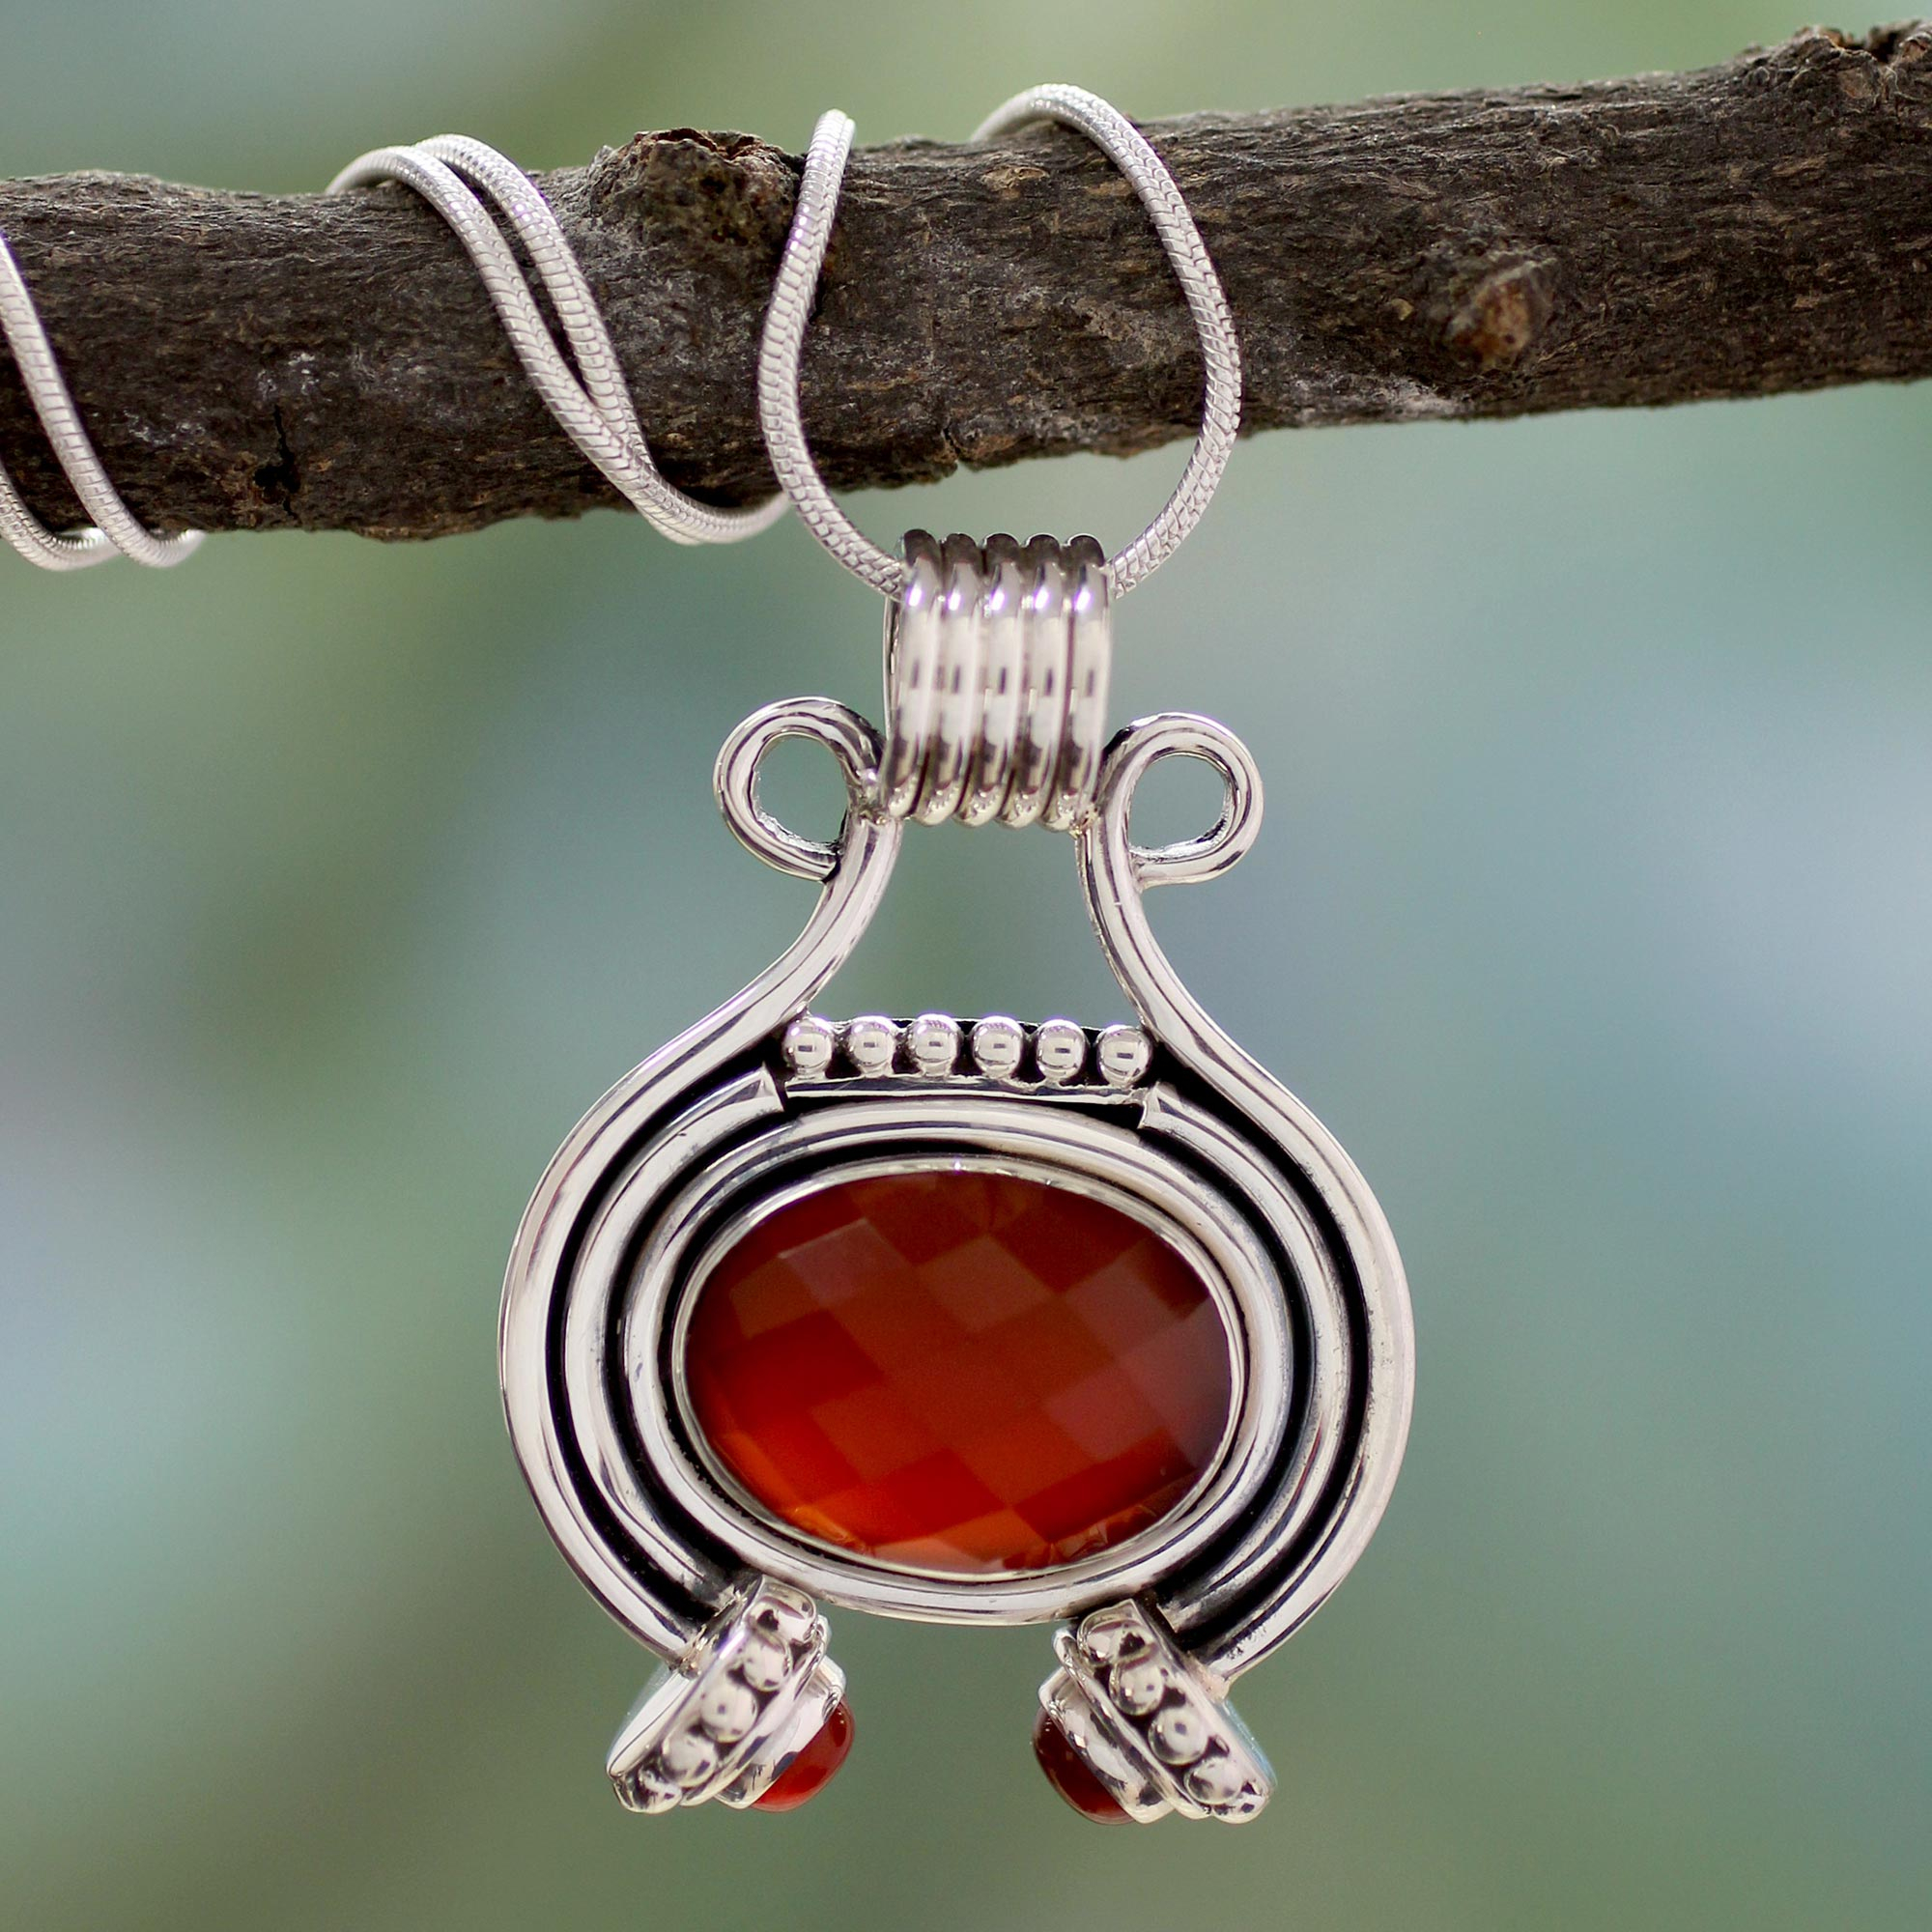 Women's Jewelry Sterling Silver and Carnelian Necklace - Desire | NOVICA